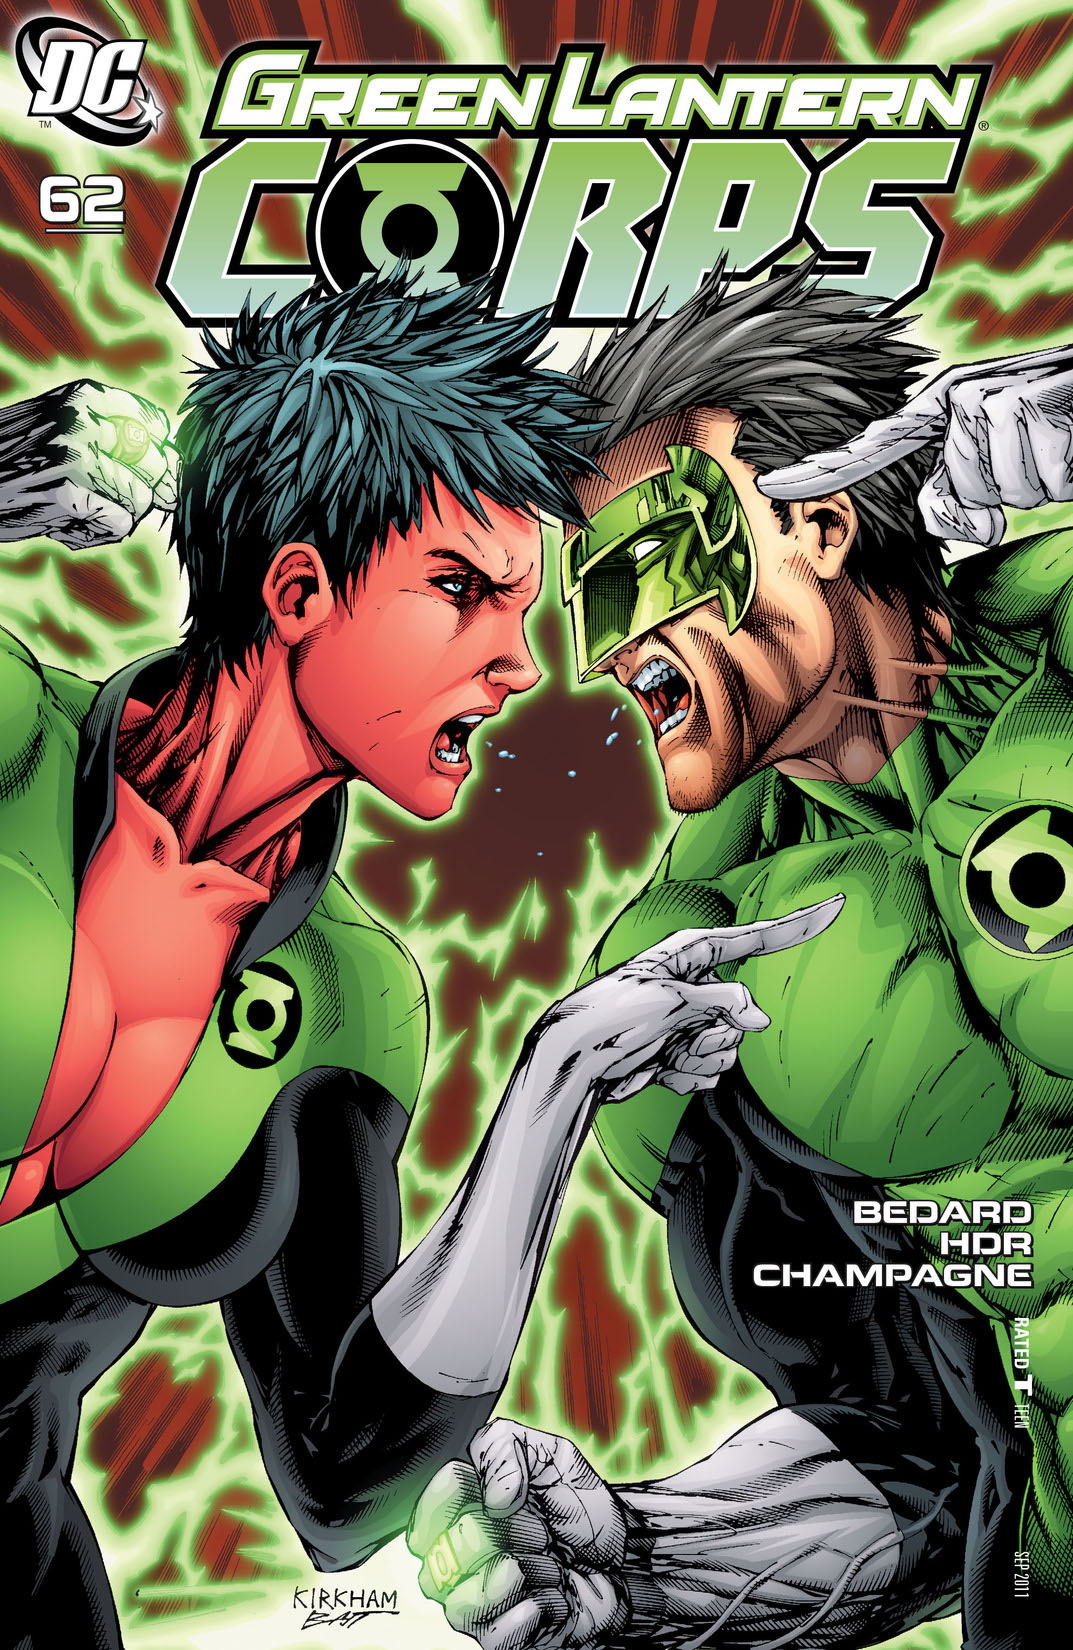 Green Lantern Corps (2006-) #62 preview images